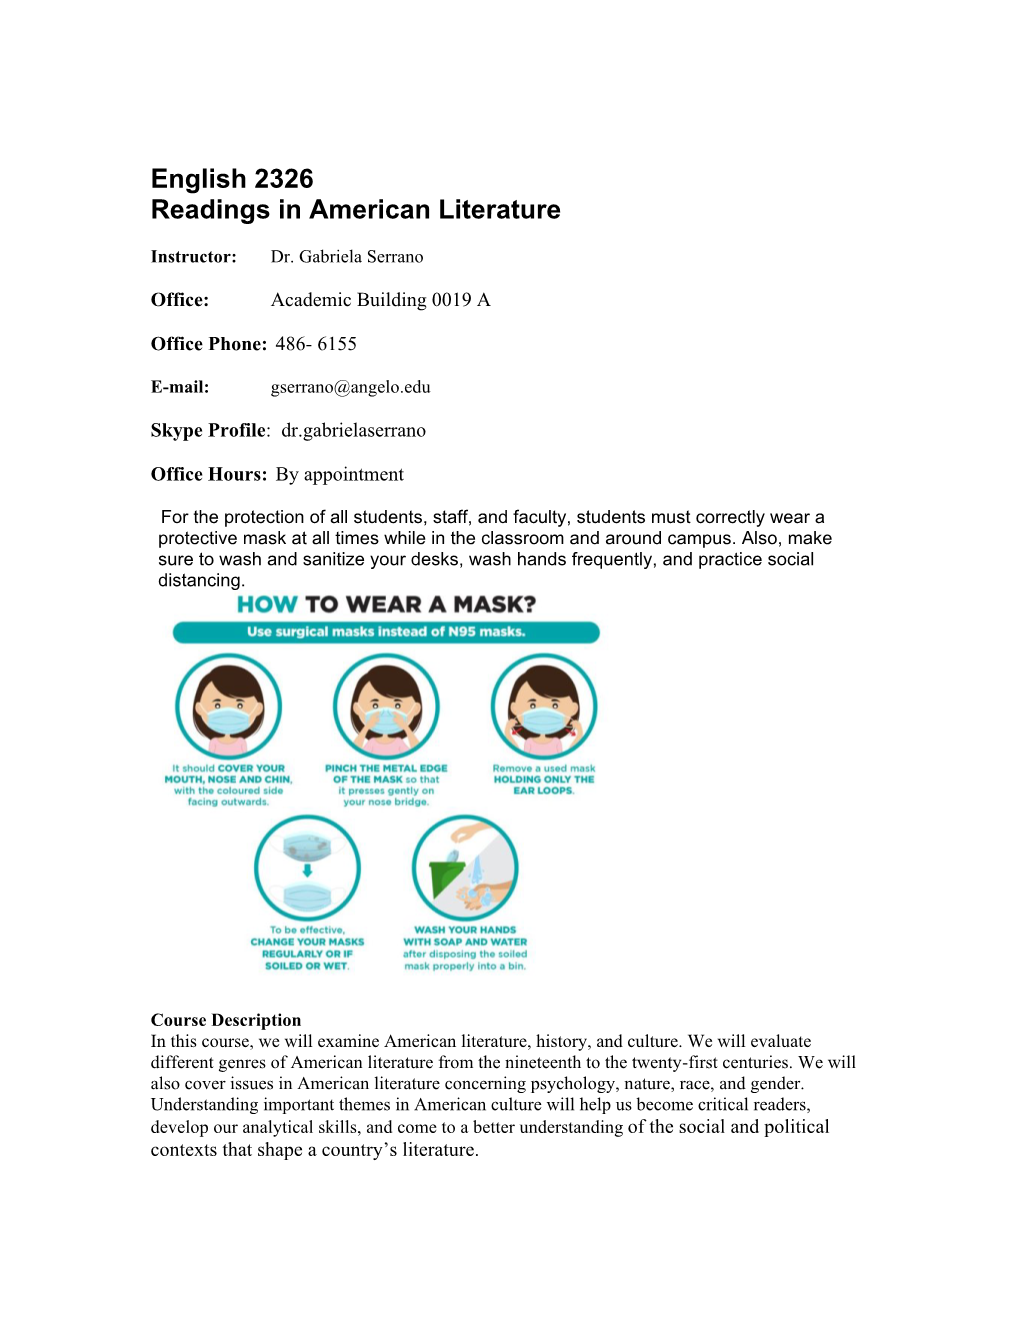 English 2326 Readings in American Literature